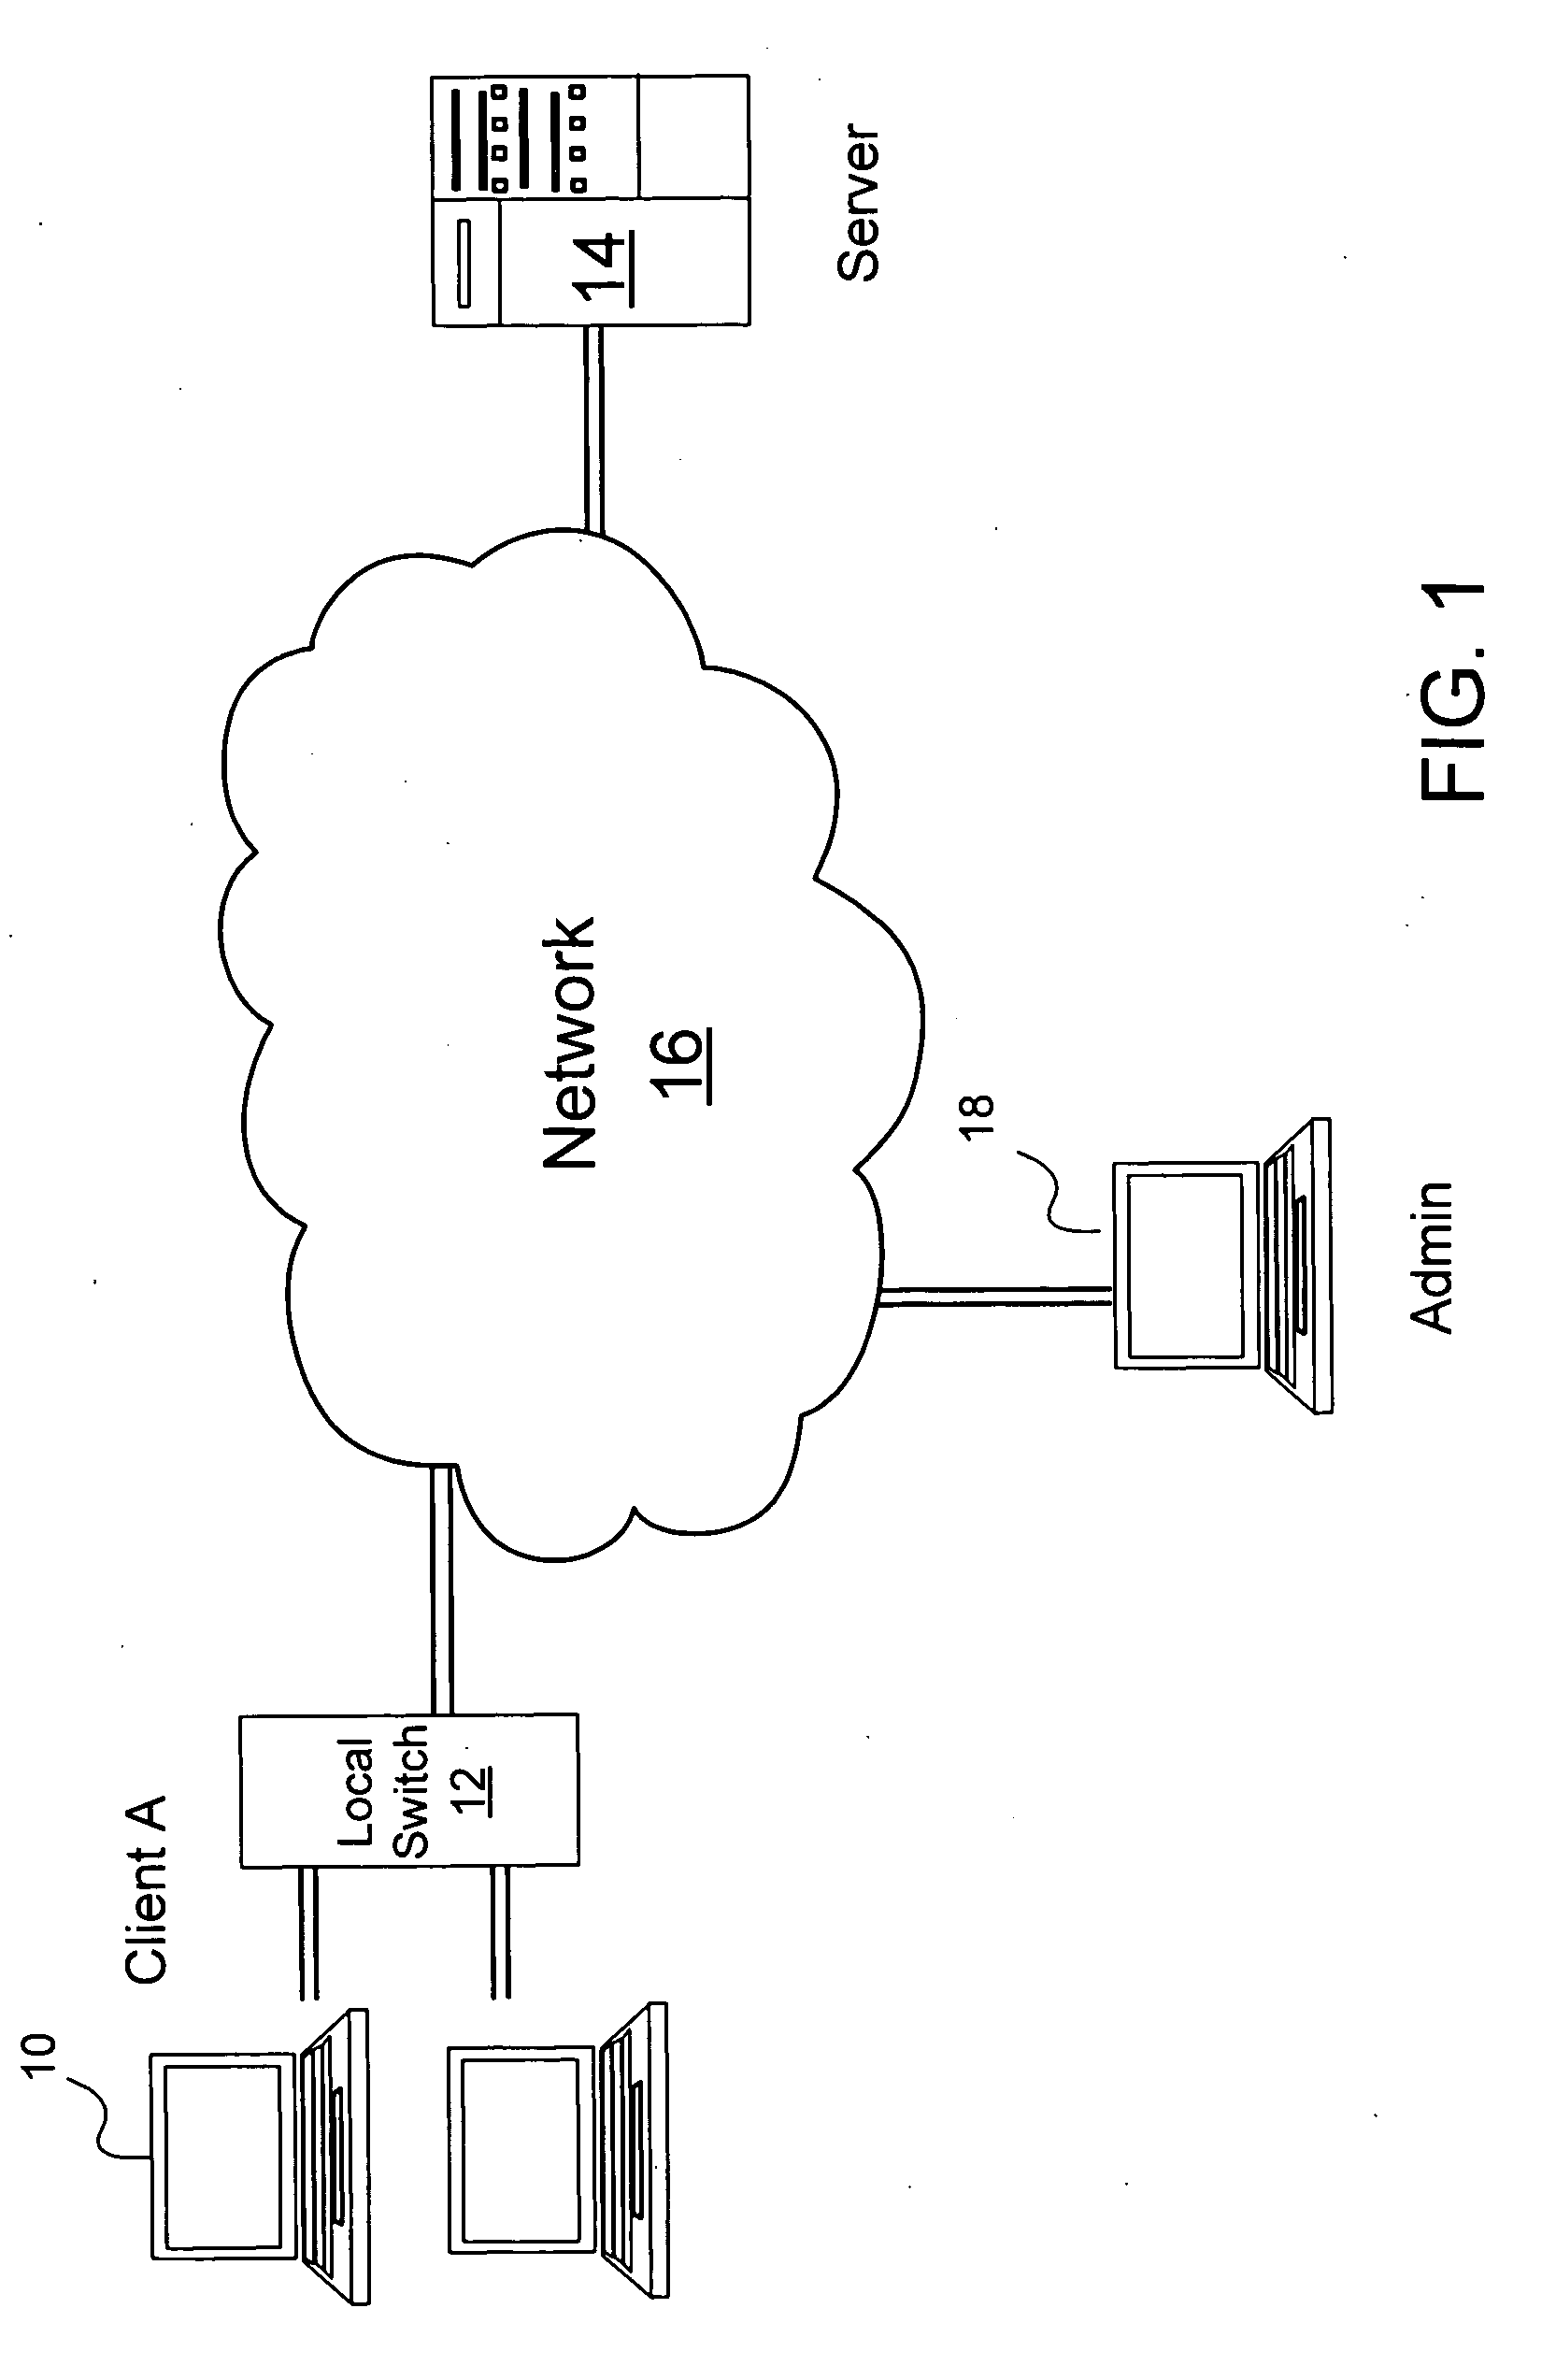 Method and system for performing simplified troubleshooting procedures to isolate connectivity problems